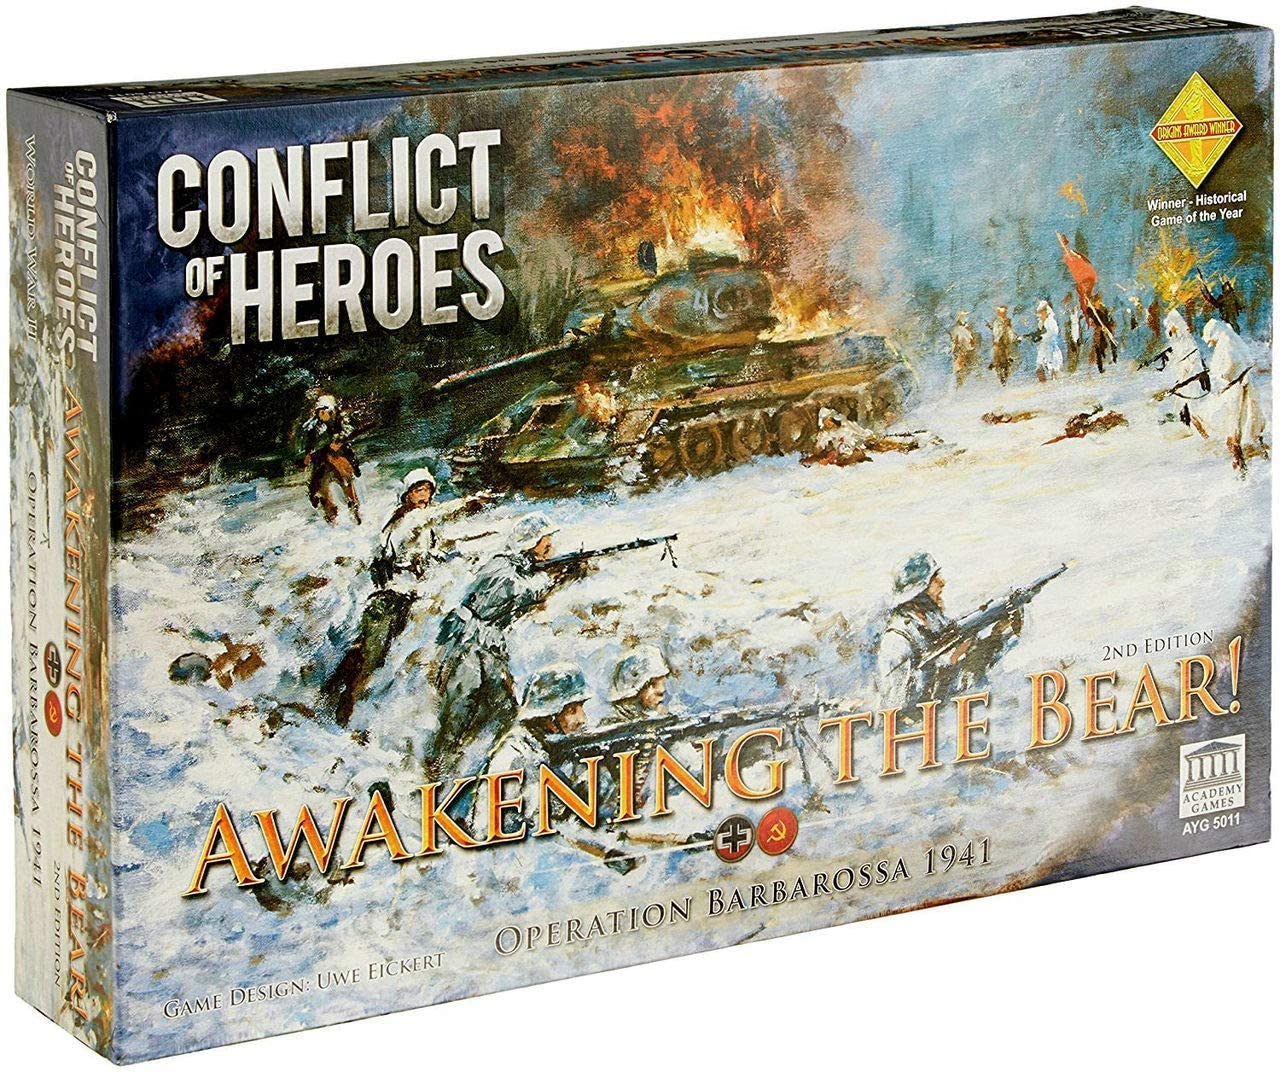 CONFLICT OF HEROES: AWAKENING THE BEAR 3RD ED